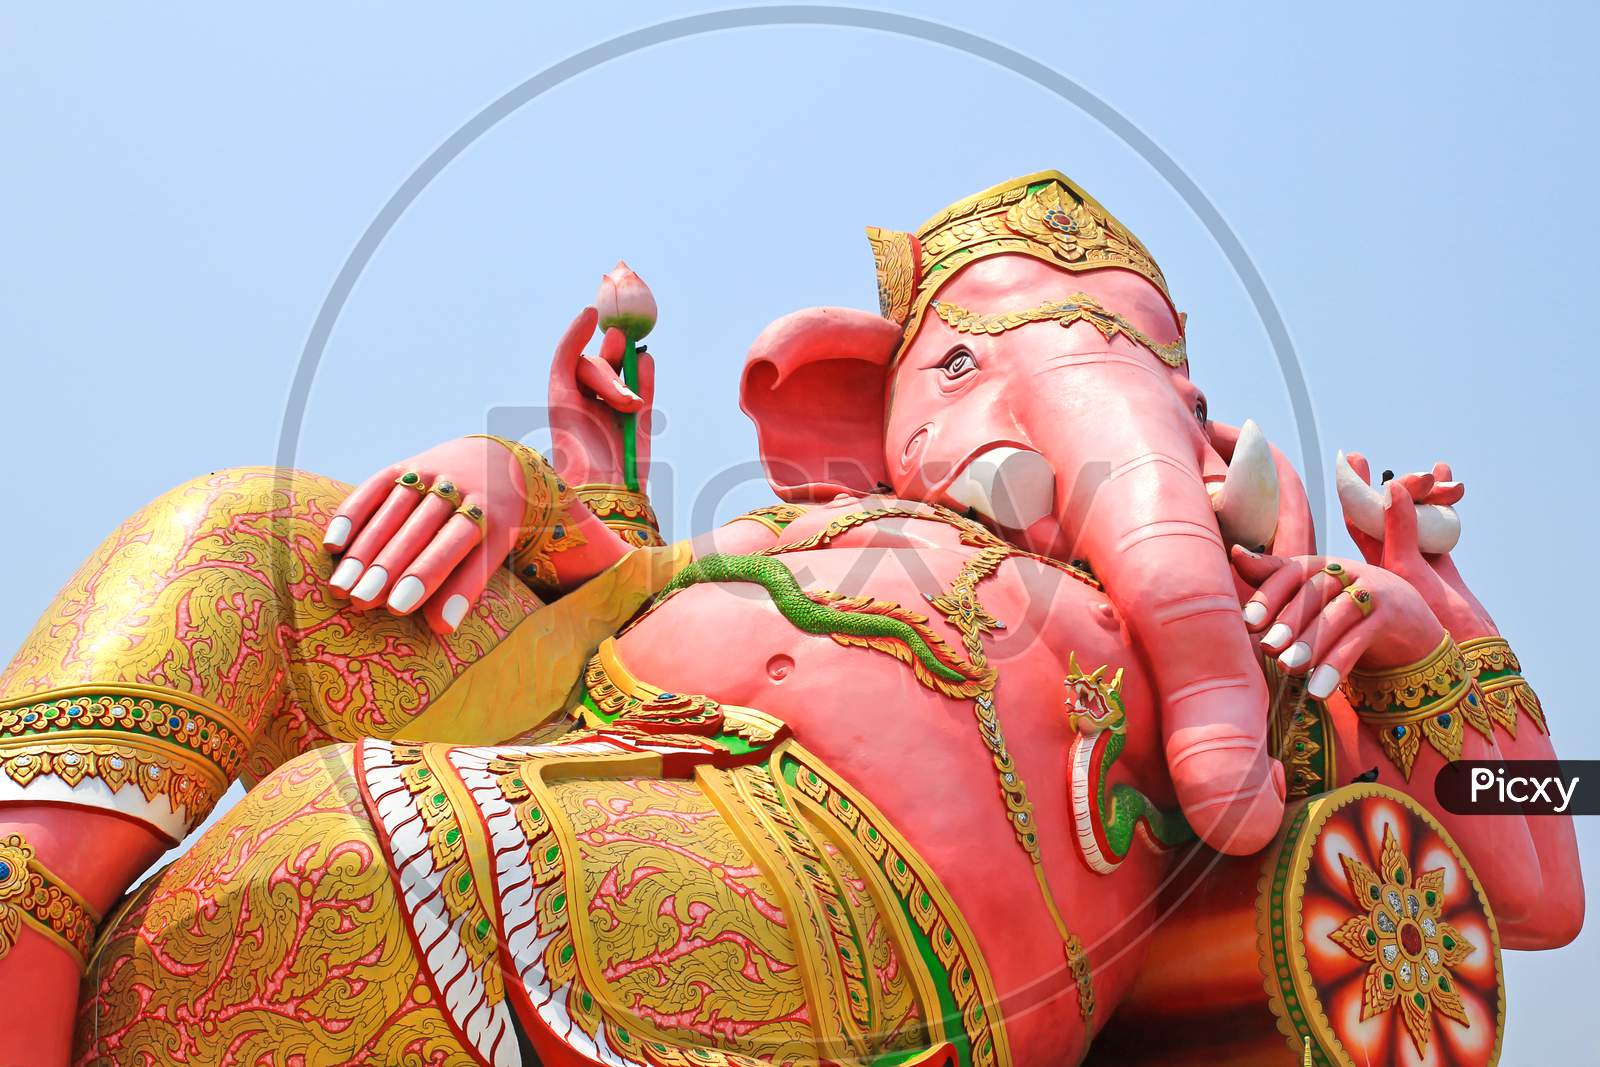 The Biggest Ganesha Statue In Temple,Thailand.